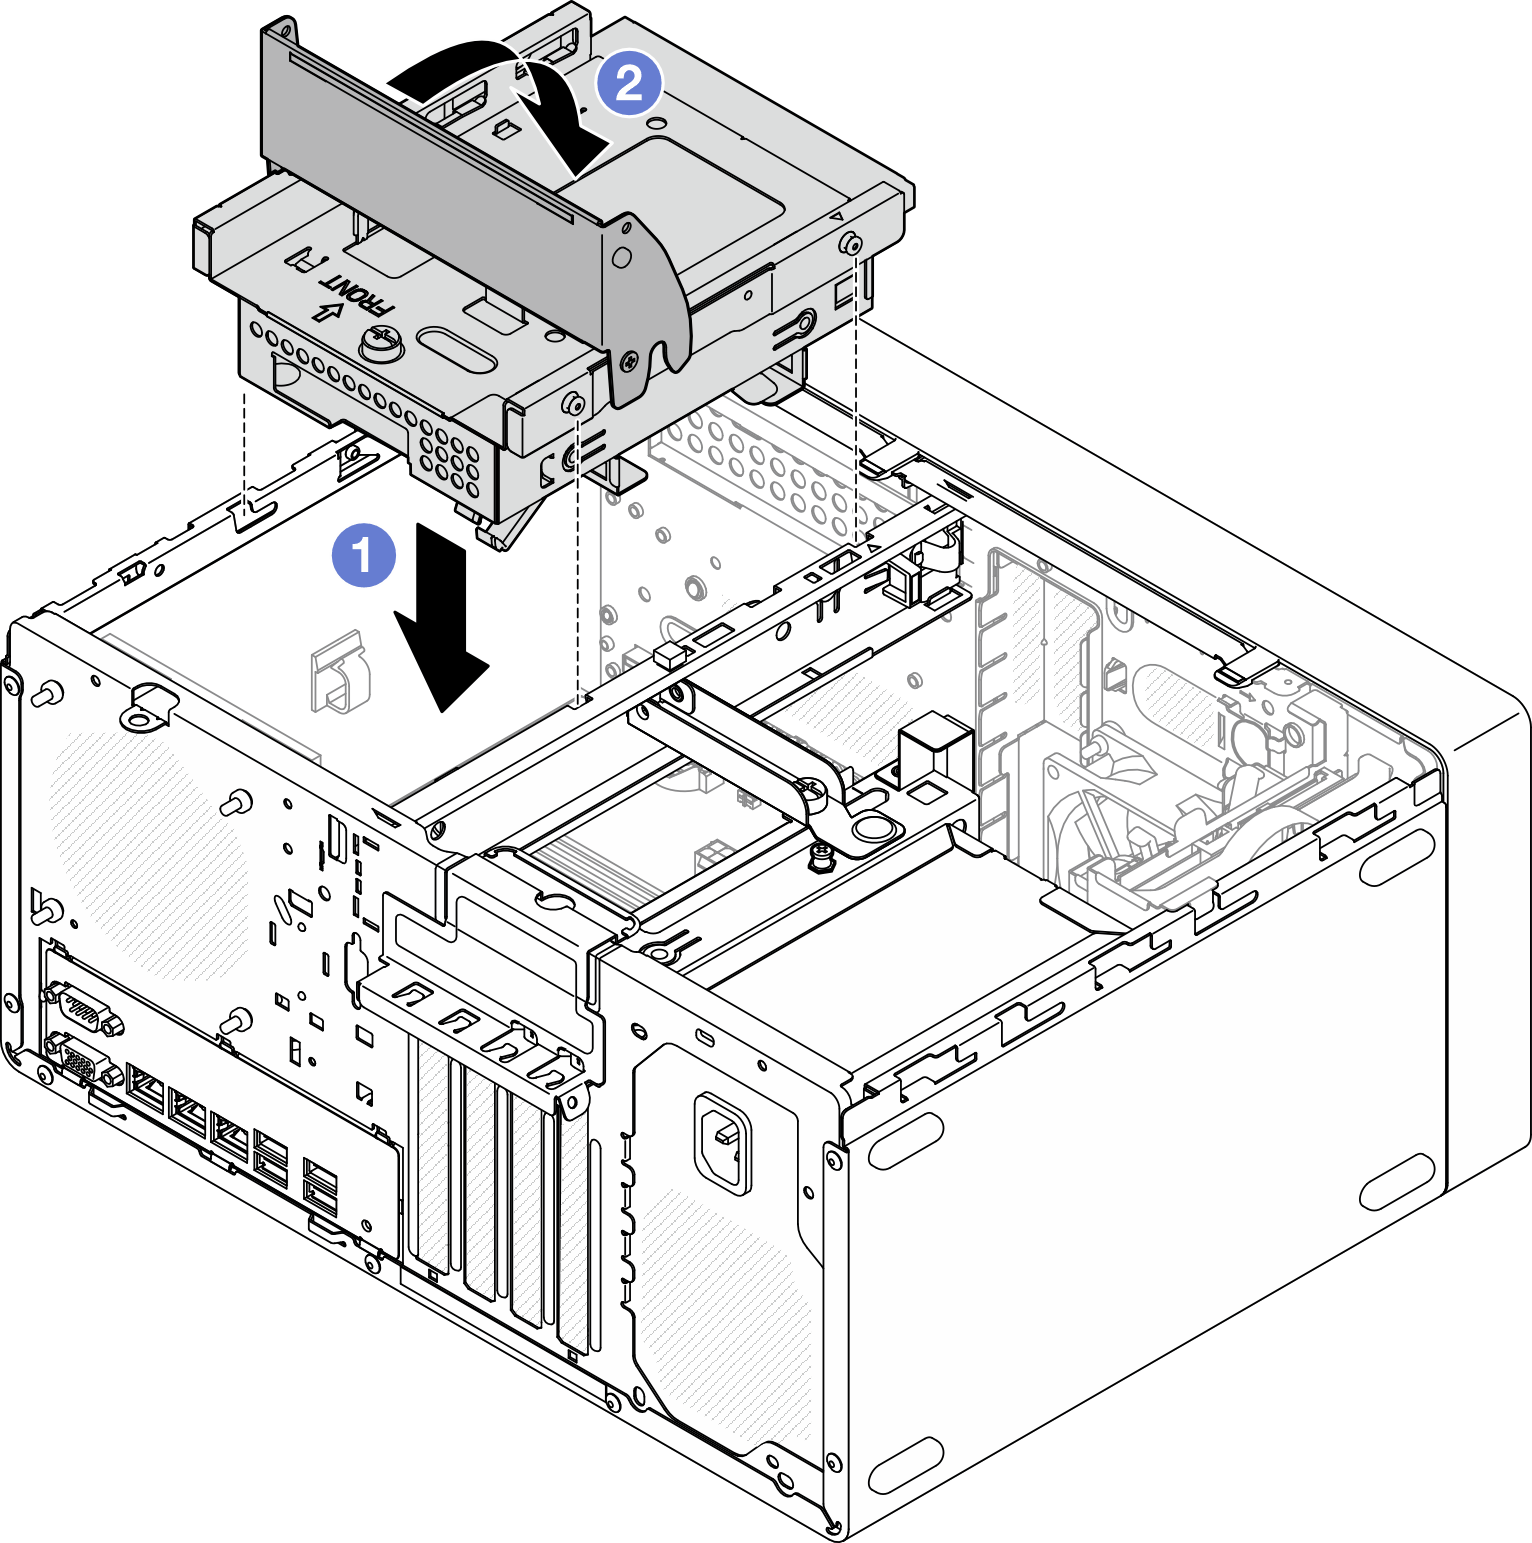 Installing the optical drive cage